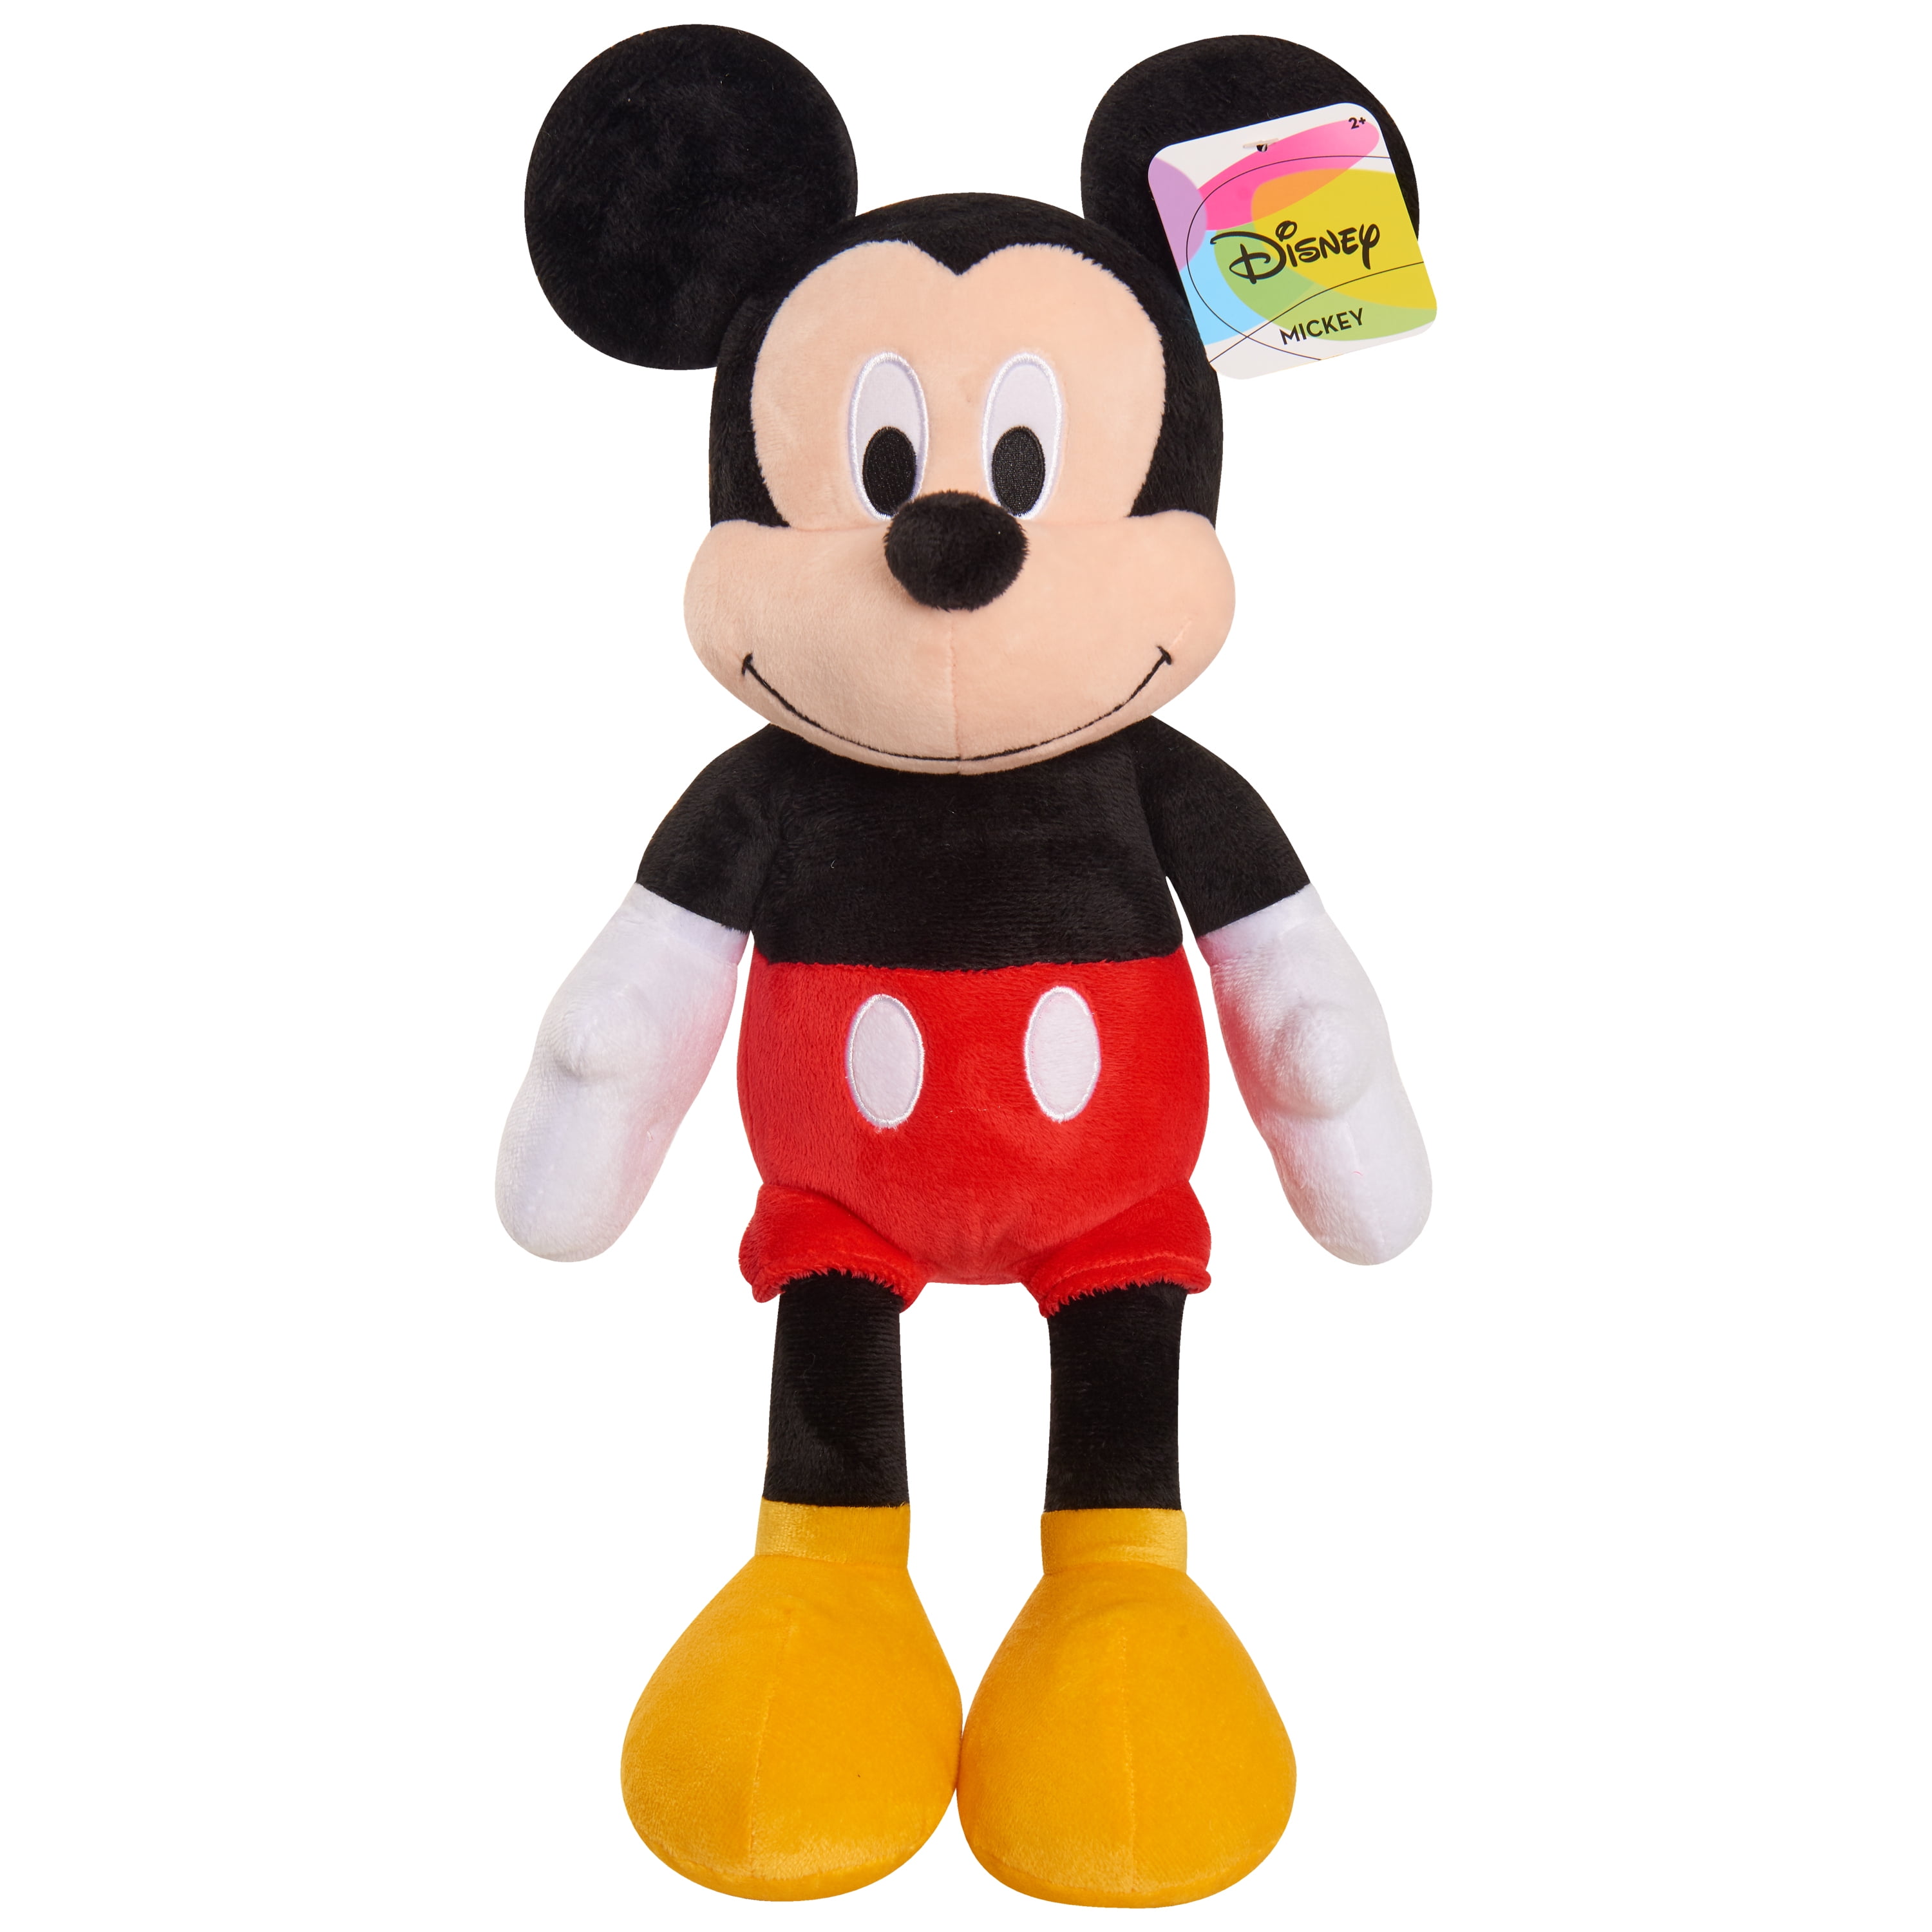 classic mickey mouse plush